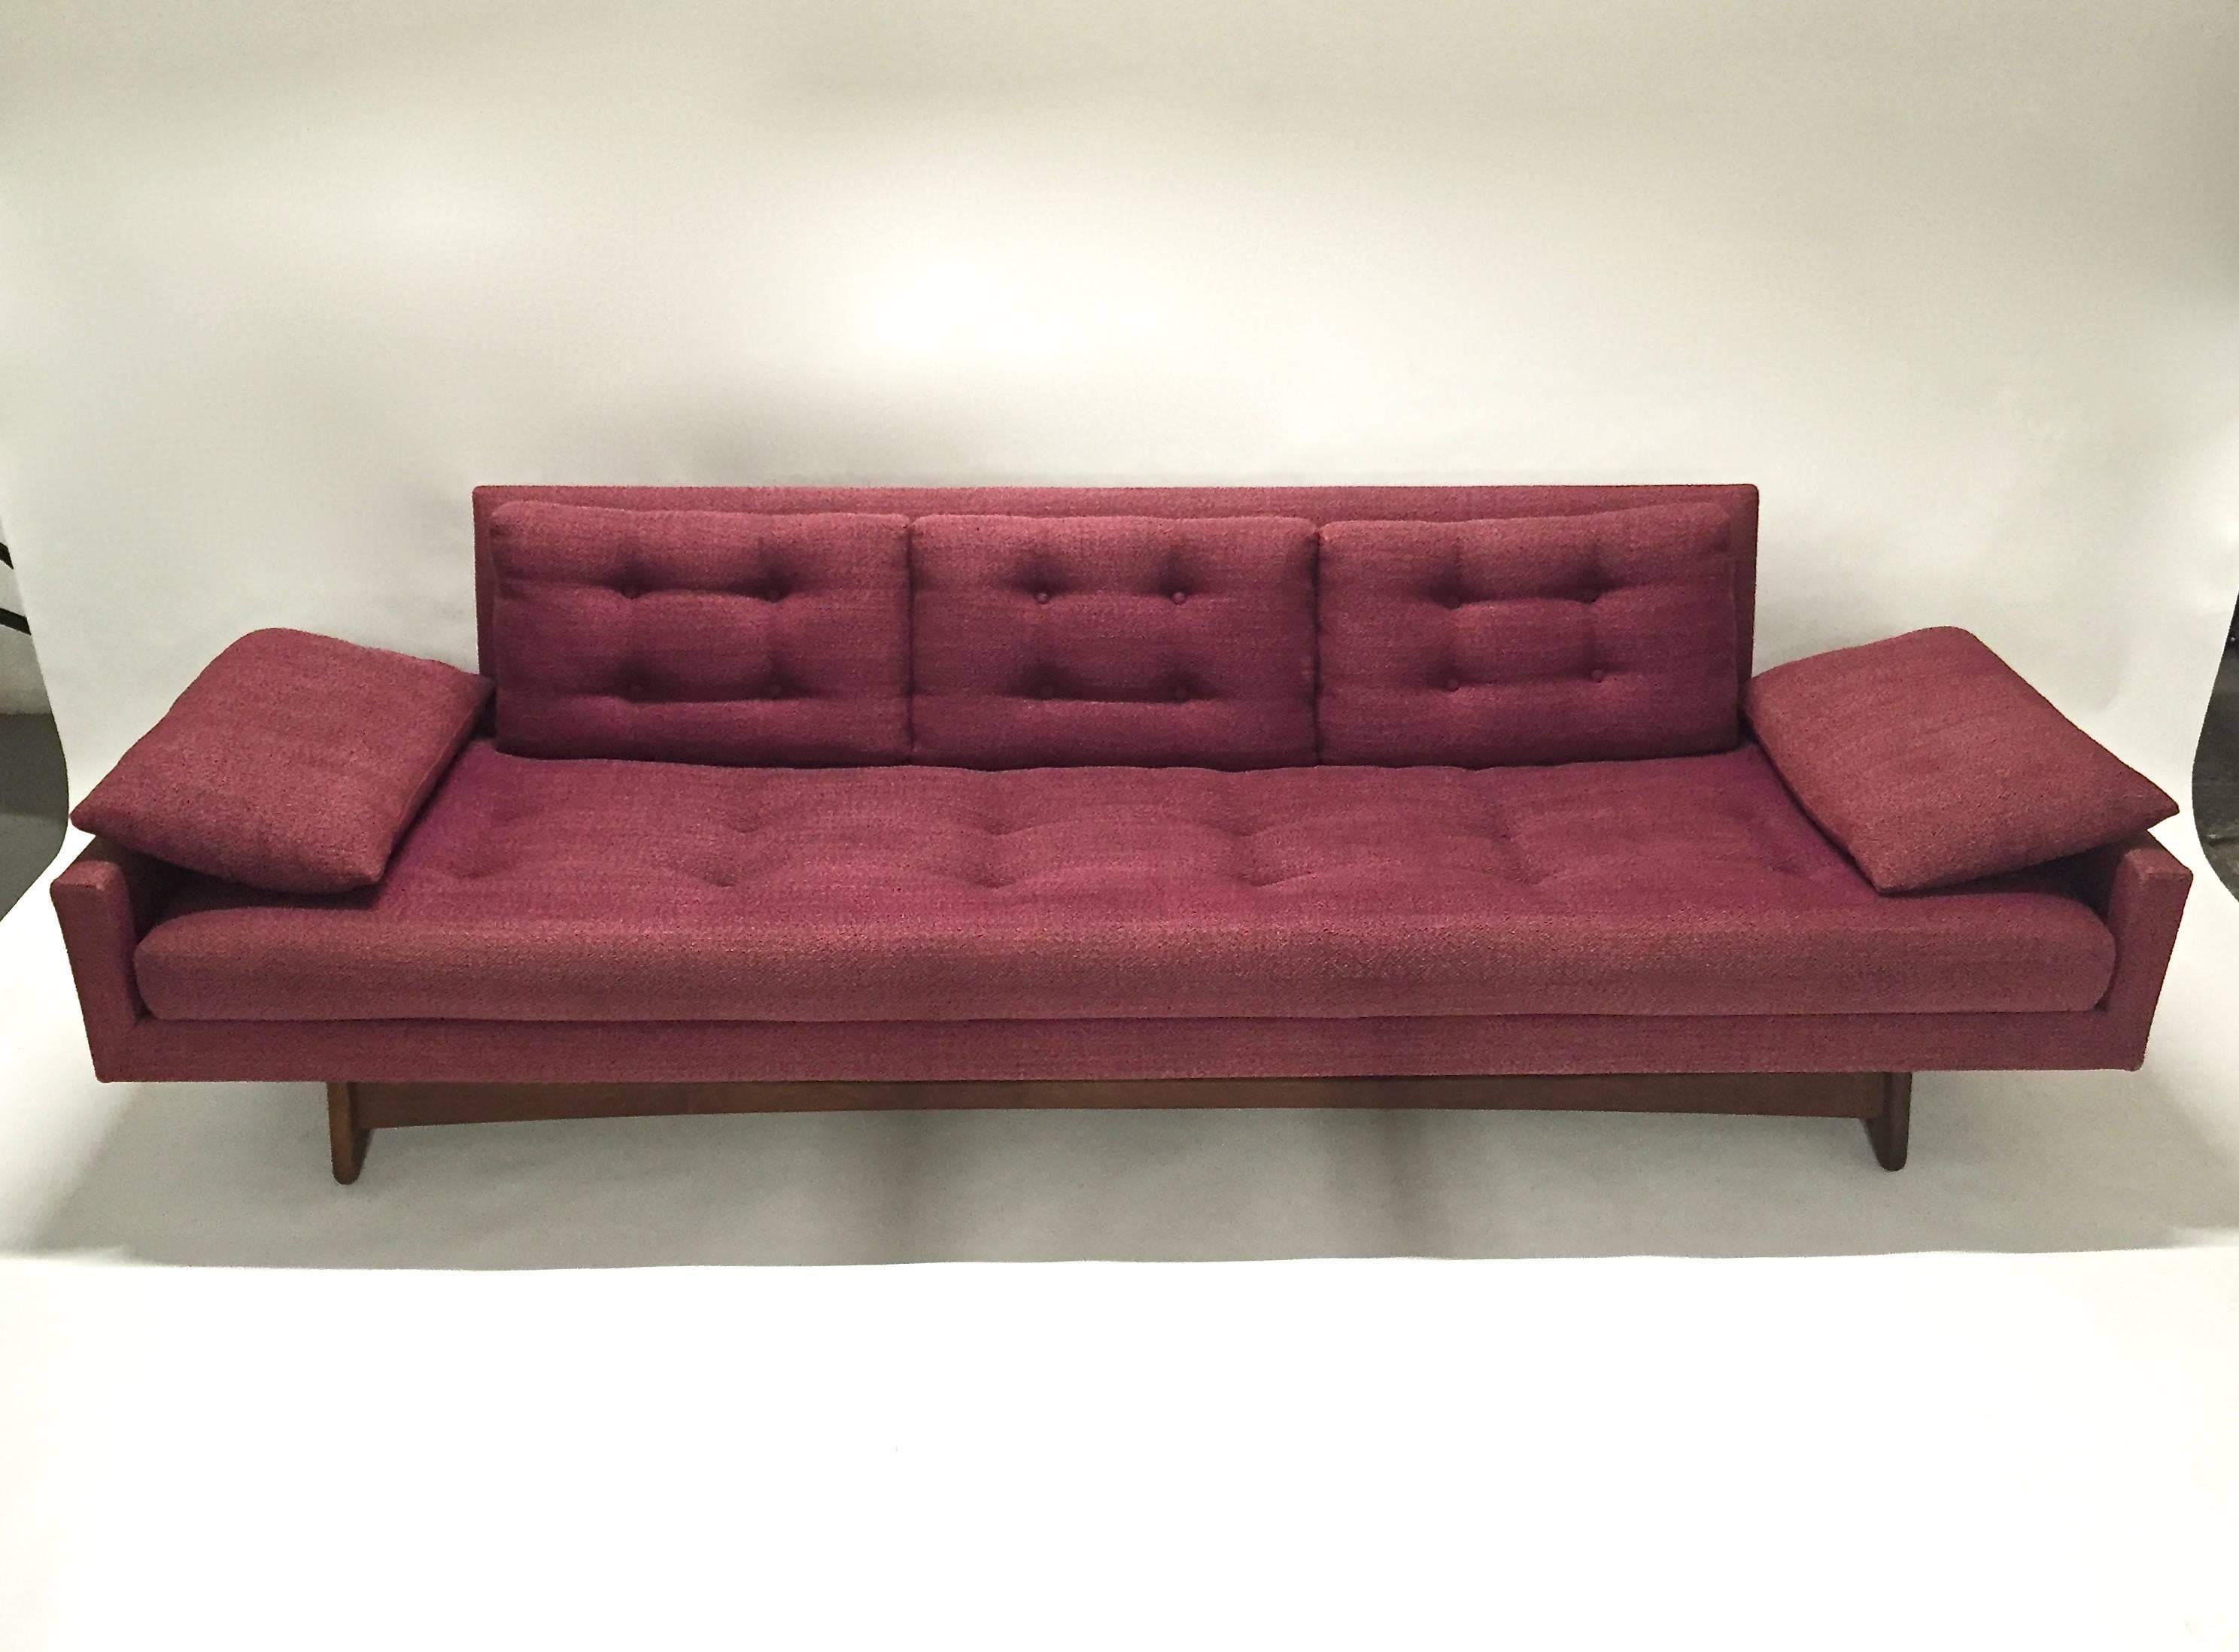 Sofa in original condition designed in the 1960s by Adrian Pearsall and manufactured by Craft Associates. Sofa model #2408 is all original. The fabric has no tears or worn spots but slightly faded under pillows.
     
     
    